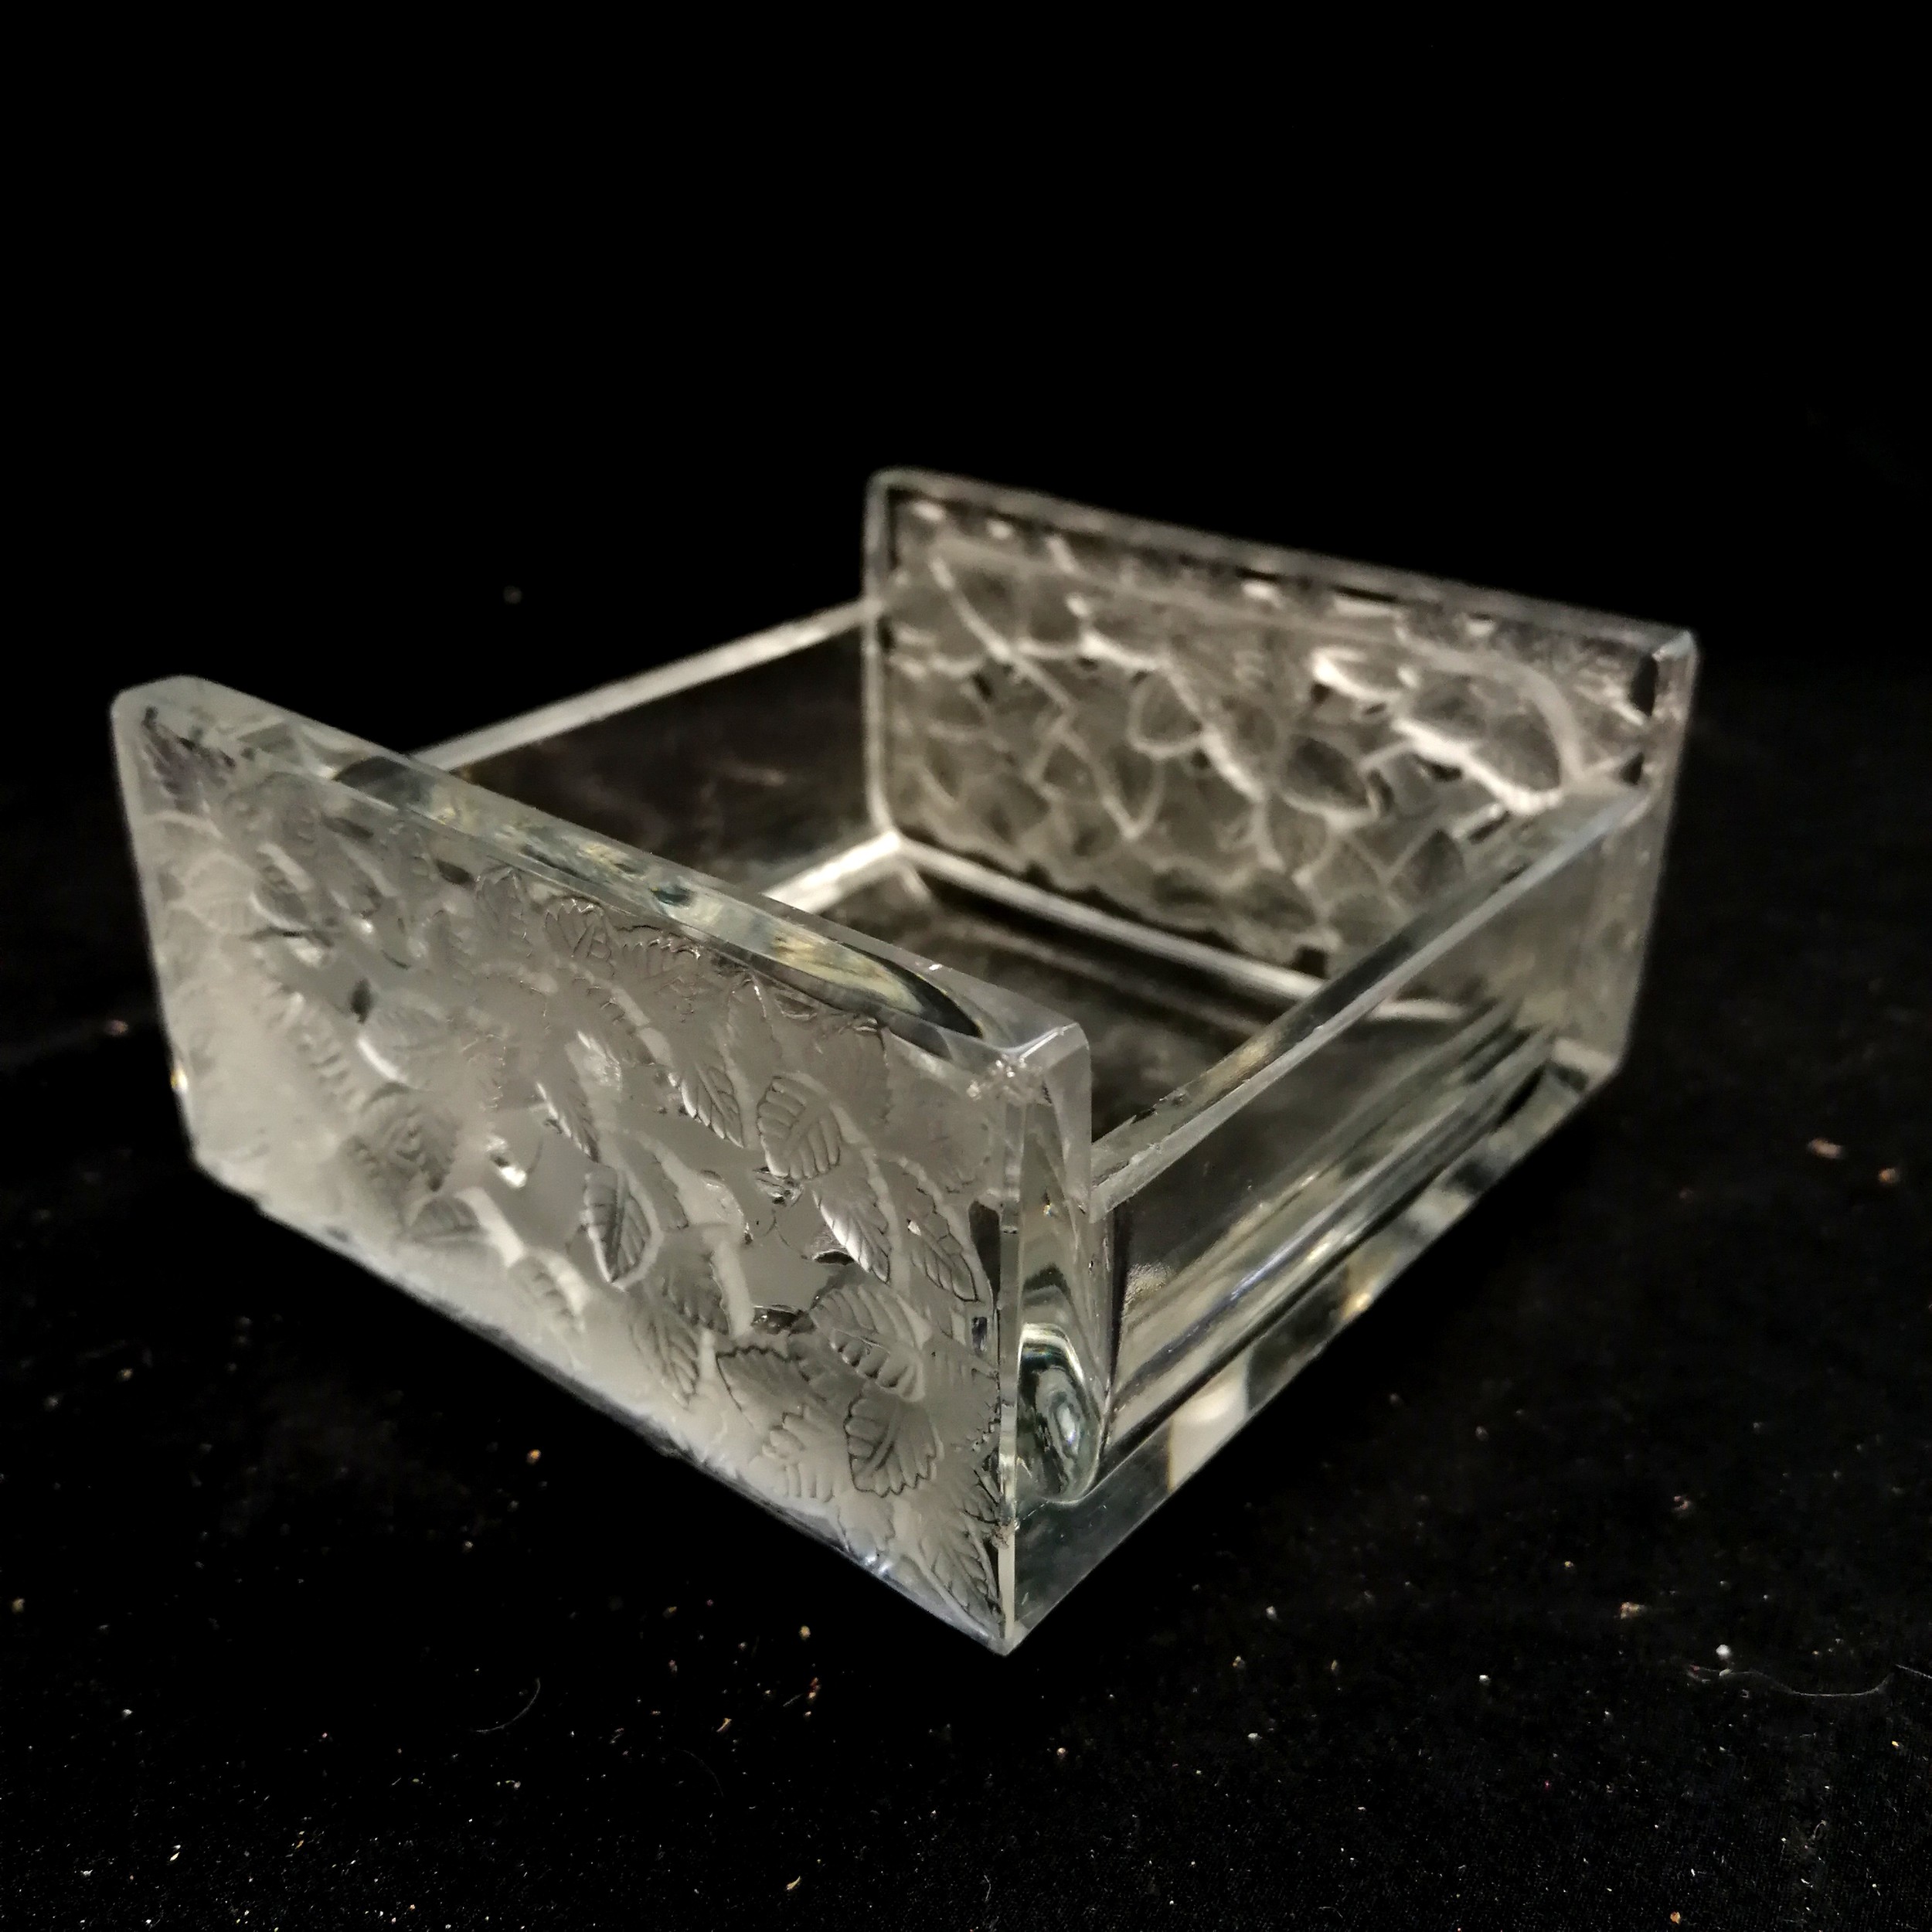 R Lalique colmar cigarette box - 10cm x 11cm ~ missing lid, has hole in centre & has chips to some